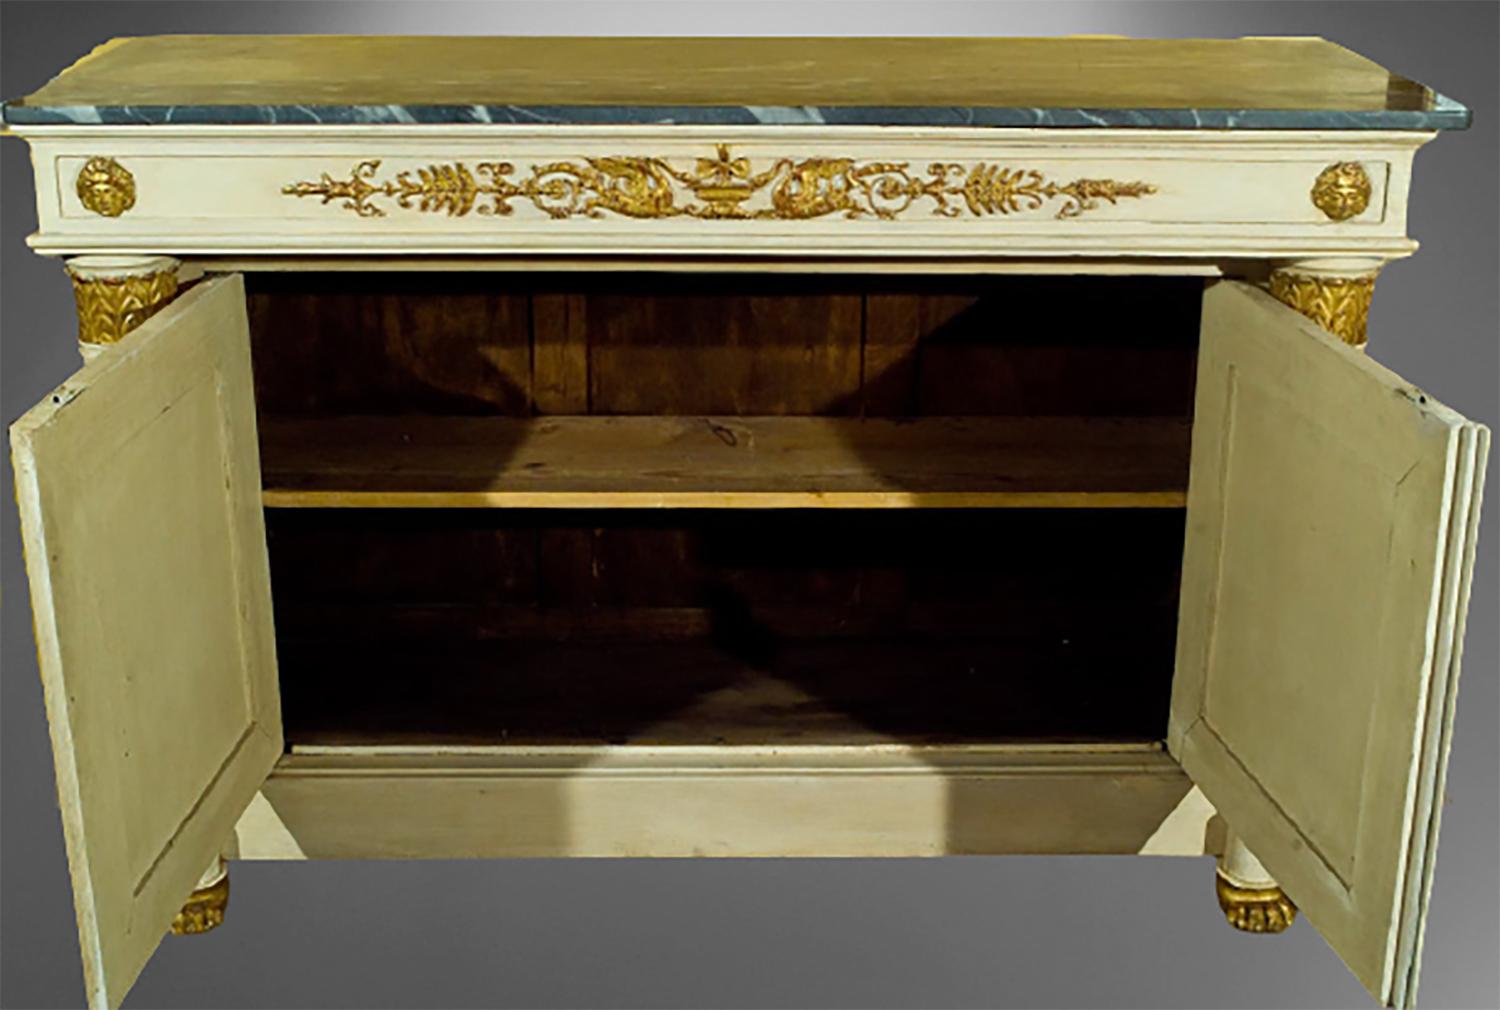 Finest early 19th century Swedish (possibly Italian) commode with marble top. Paint decorated with gold leaf highlights.